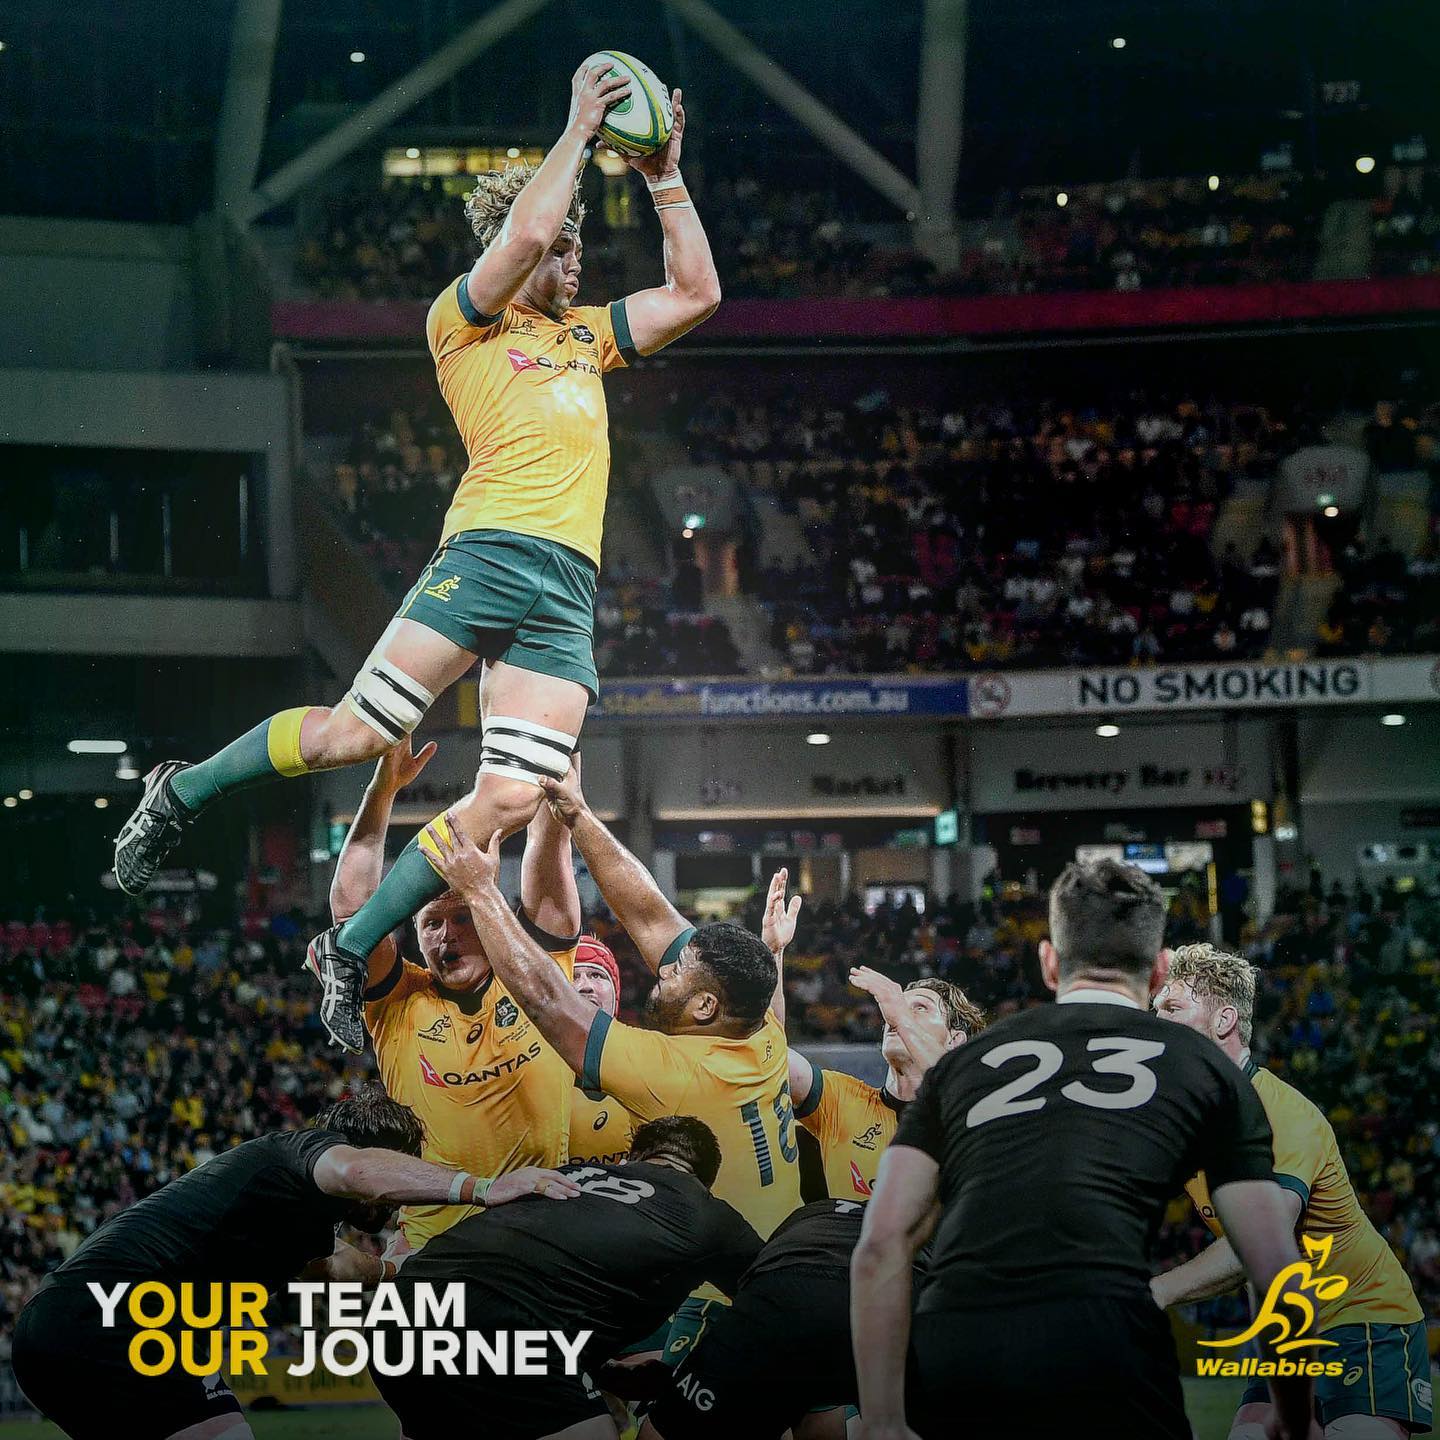 Ned Hanigan in a lineout for the Wallabies against the All Blacks